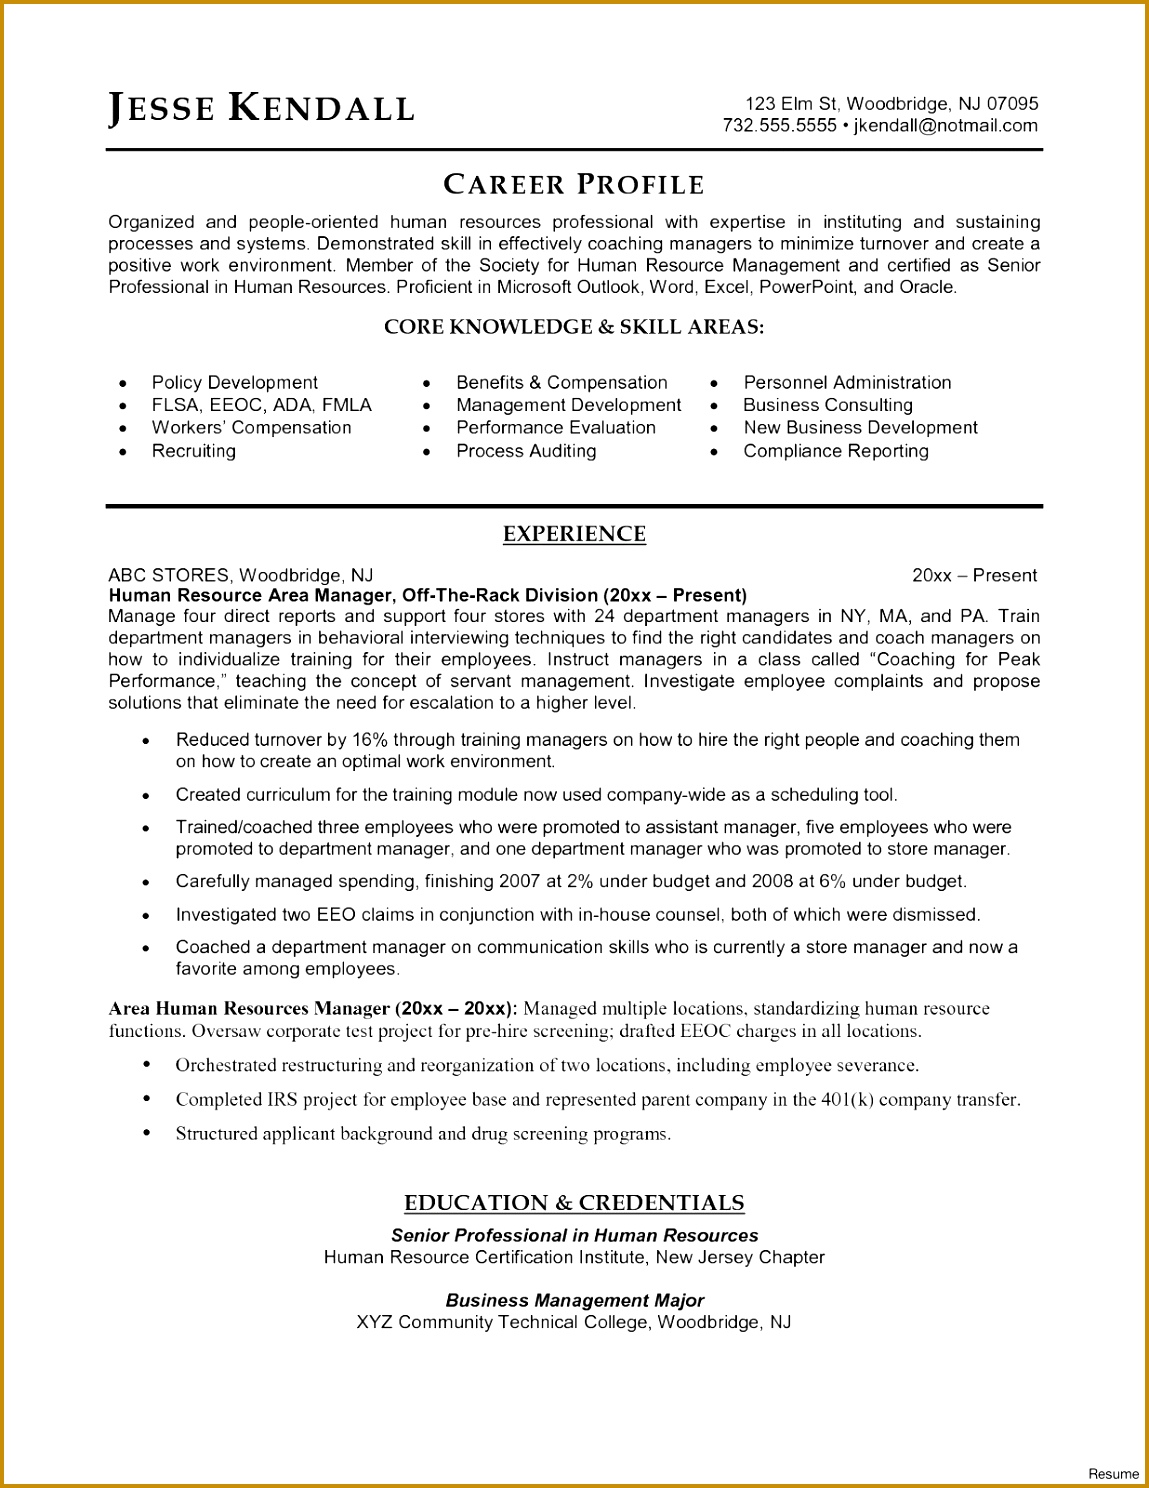 resume cover letter templates awesome resume template microsoft word professional job resume template od of resume cover letter templates 11491488